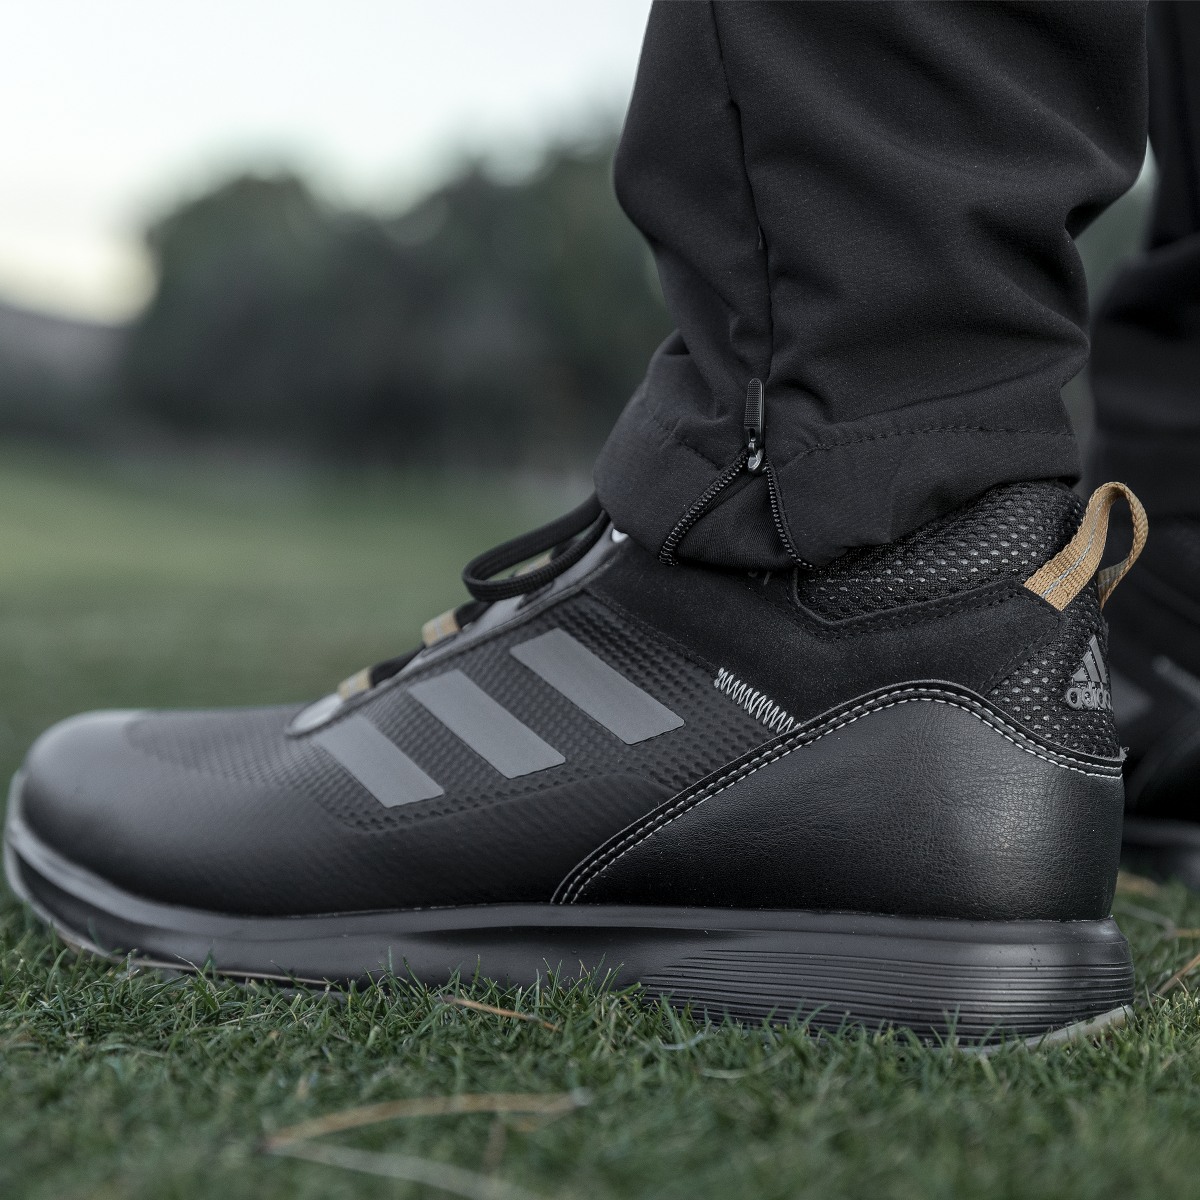 Adidas S2G Recycled Polyester Mid-Cut Golf Shoes. 4